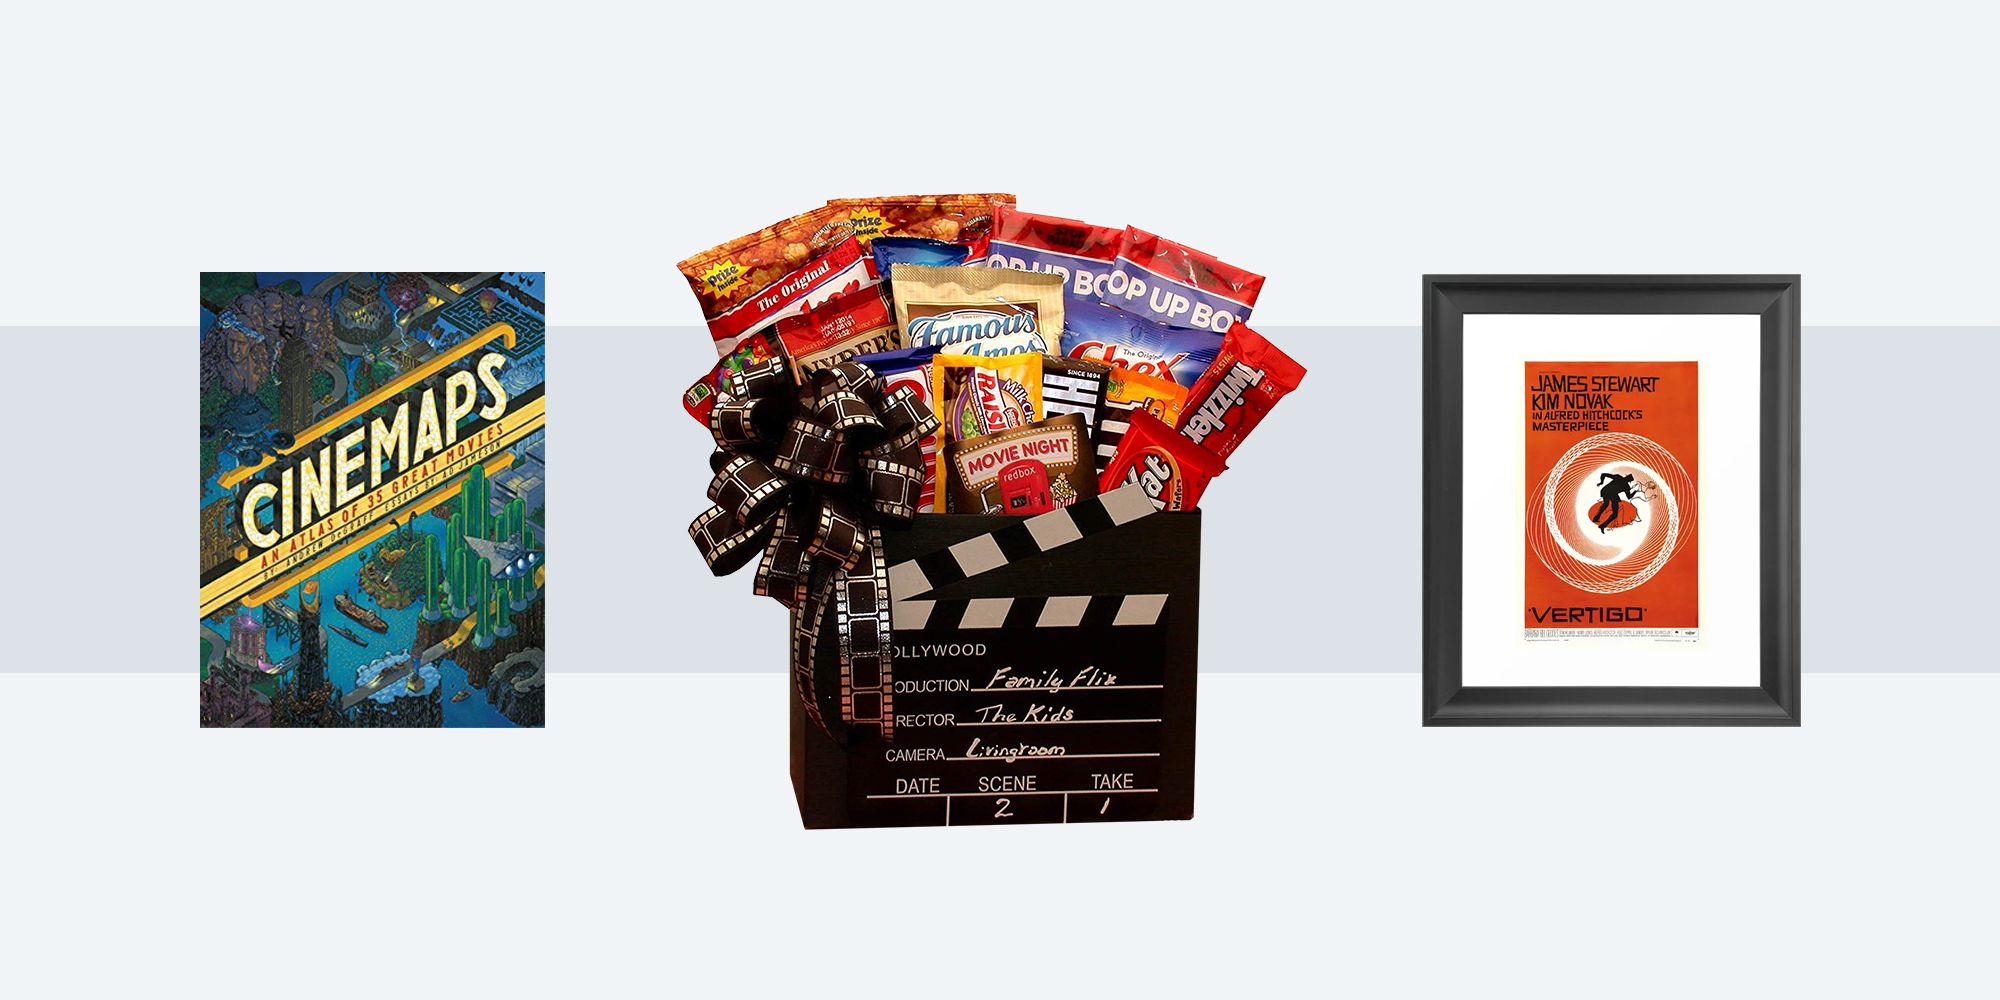 Quick and easy gifts: Movie, TV and music box sets